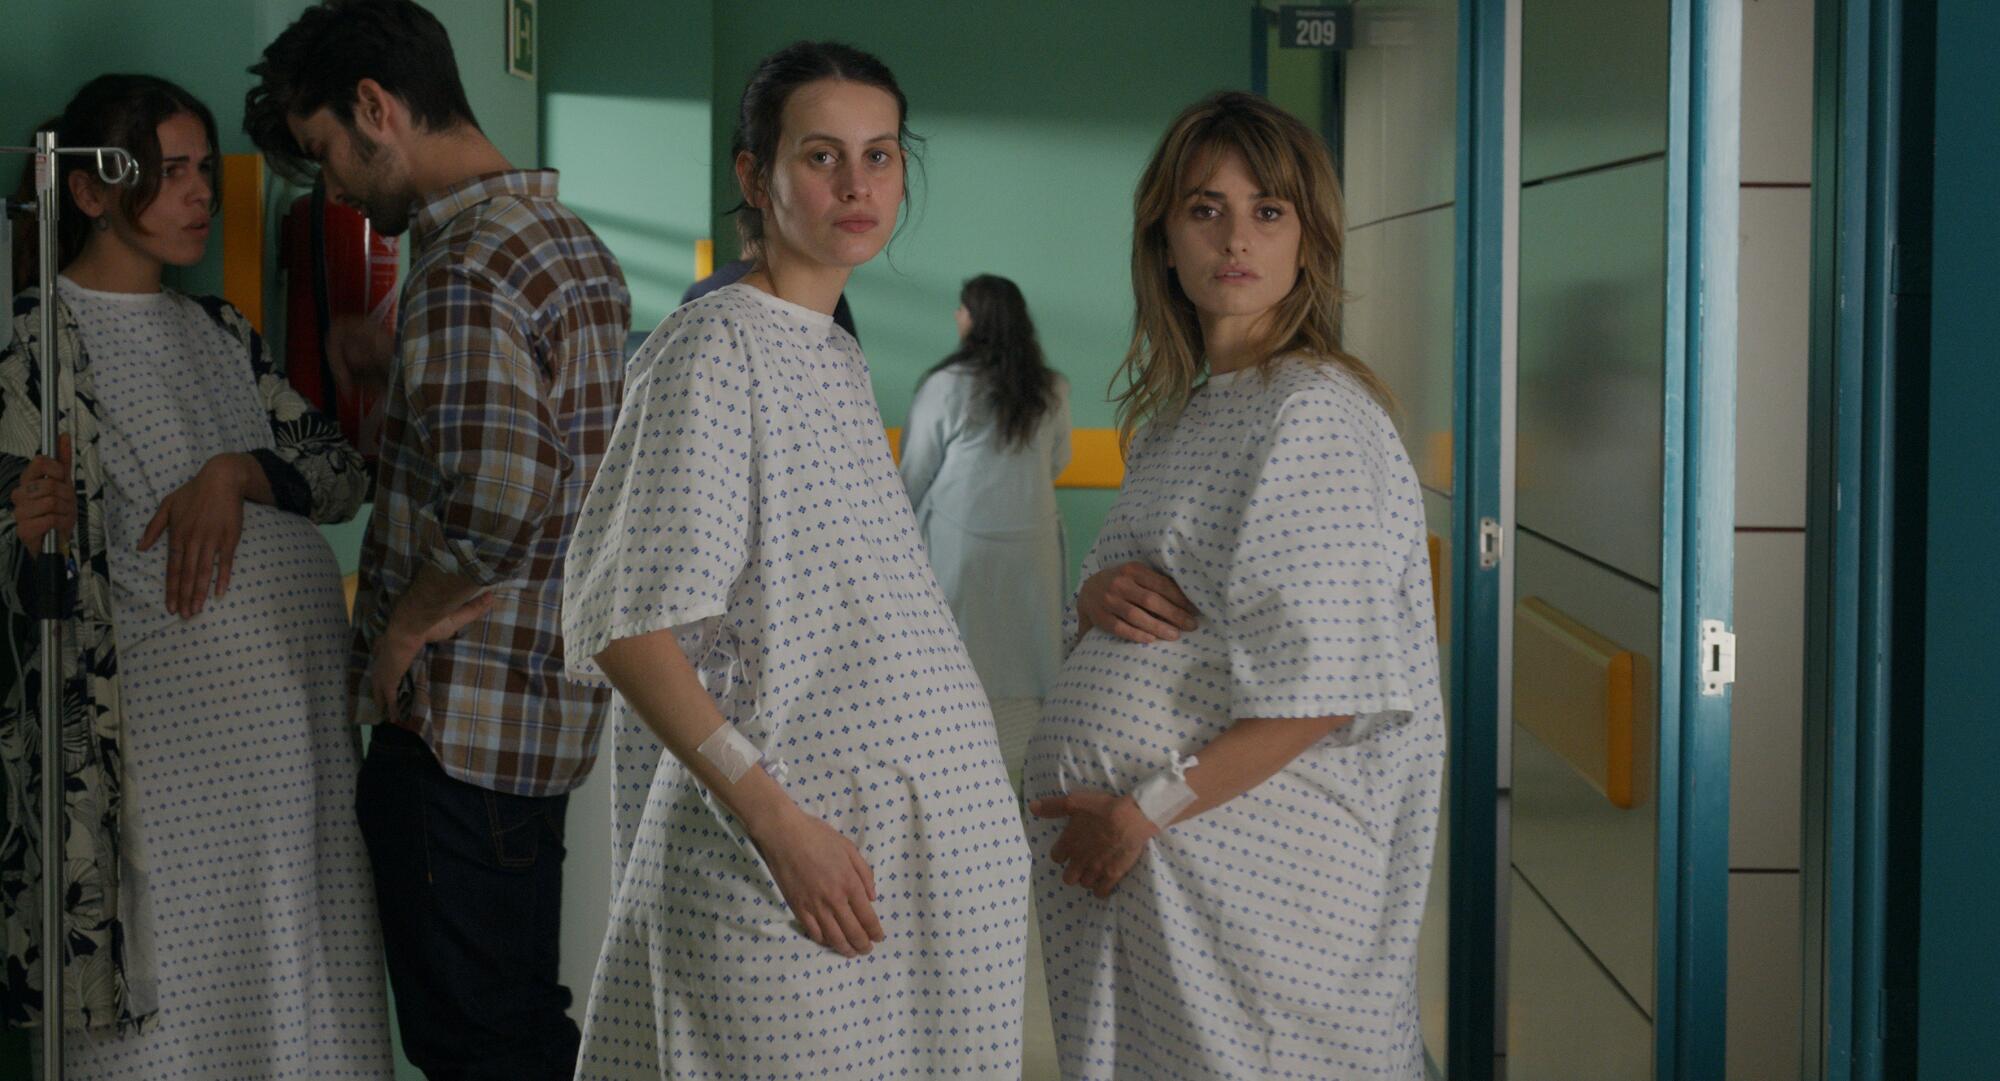 Two pregnant women in hospital gowns in a hospital